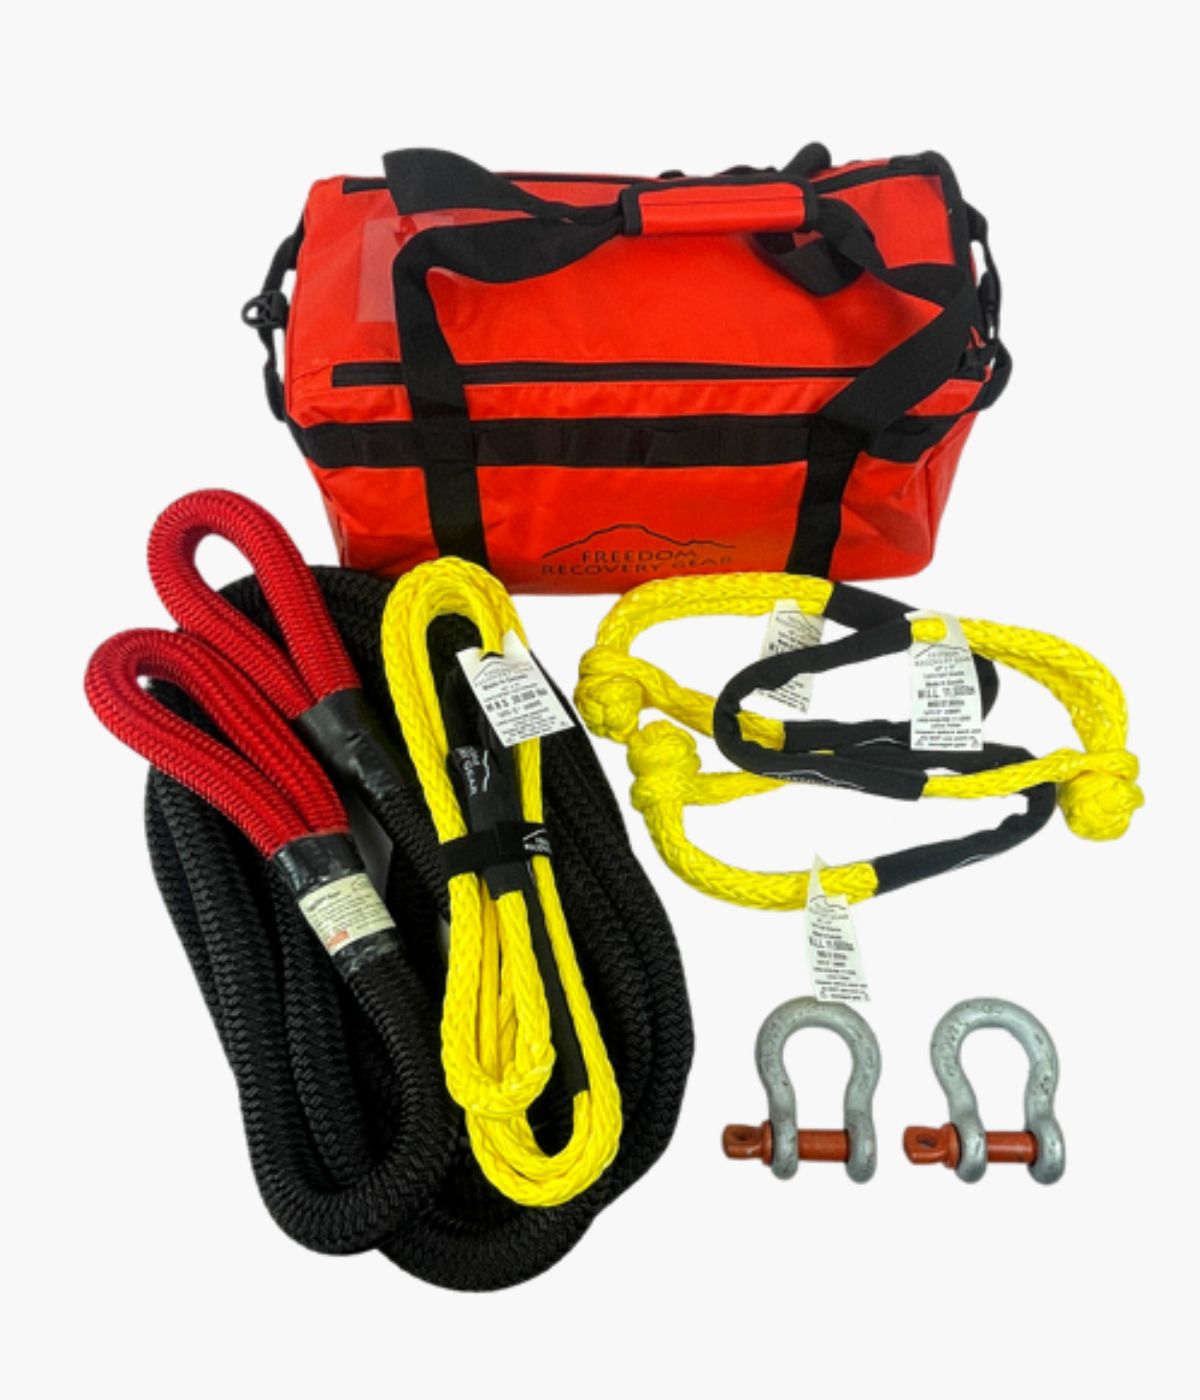 Warn recovery kit, Winch accessories, Recovery gear